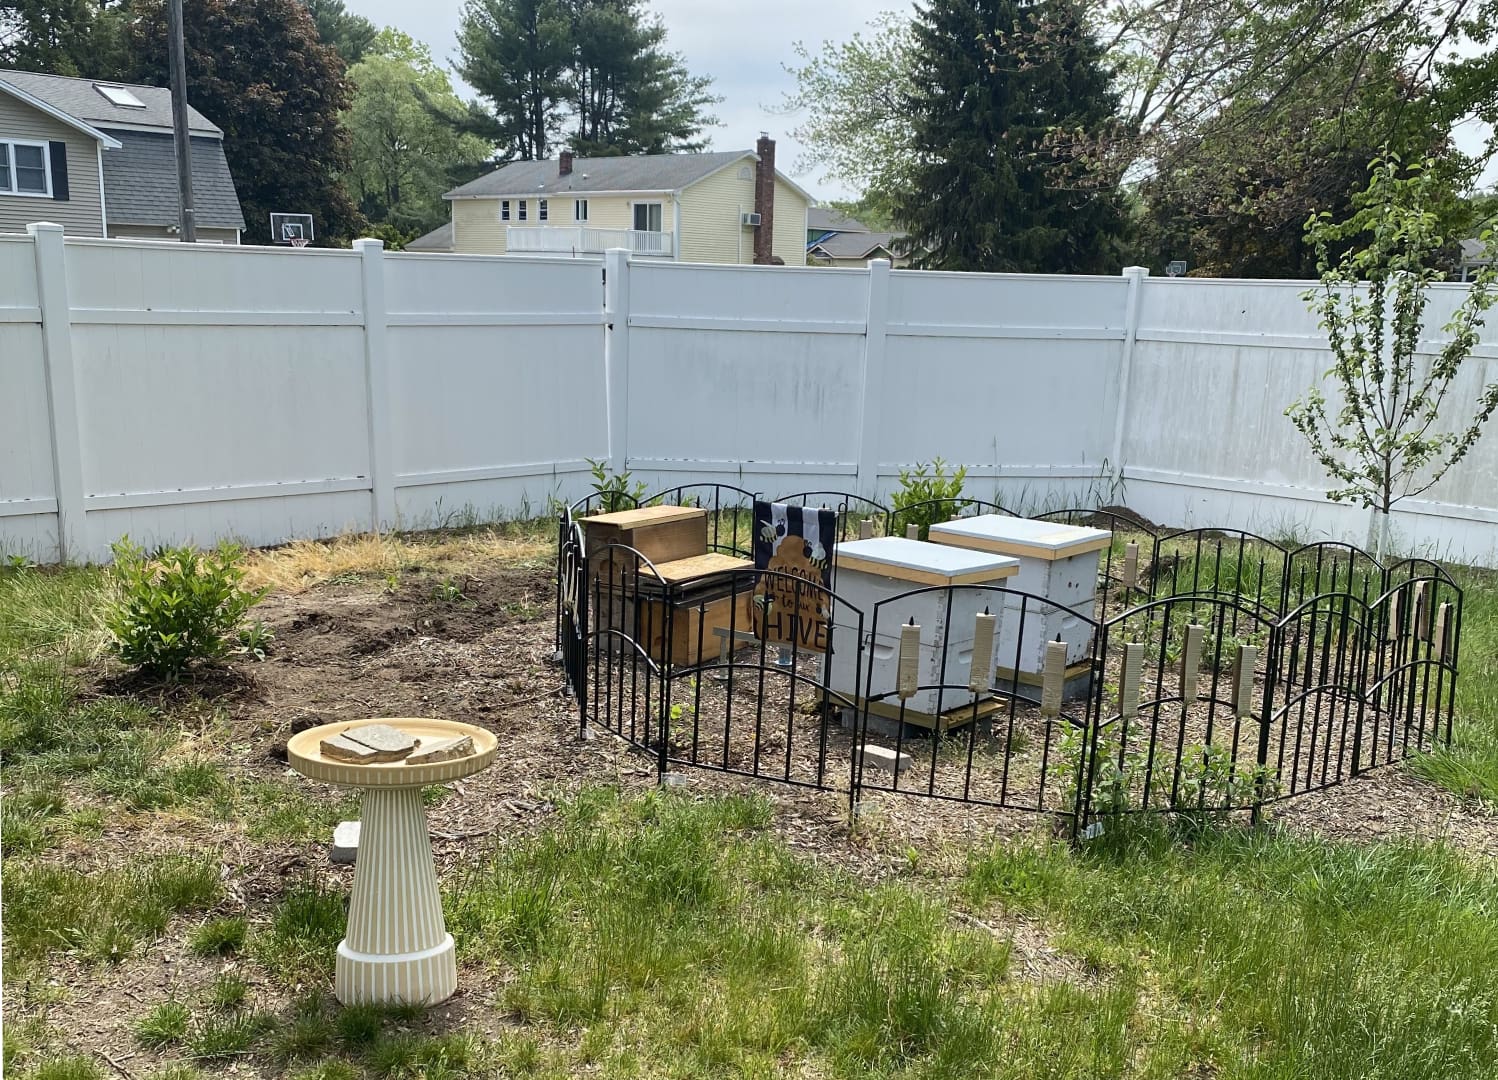 A fenced in area with two bees and a bird bath.